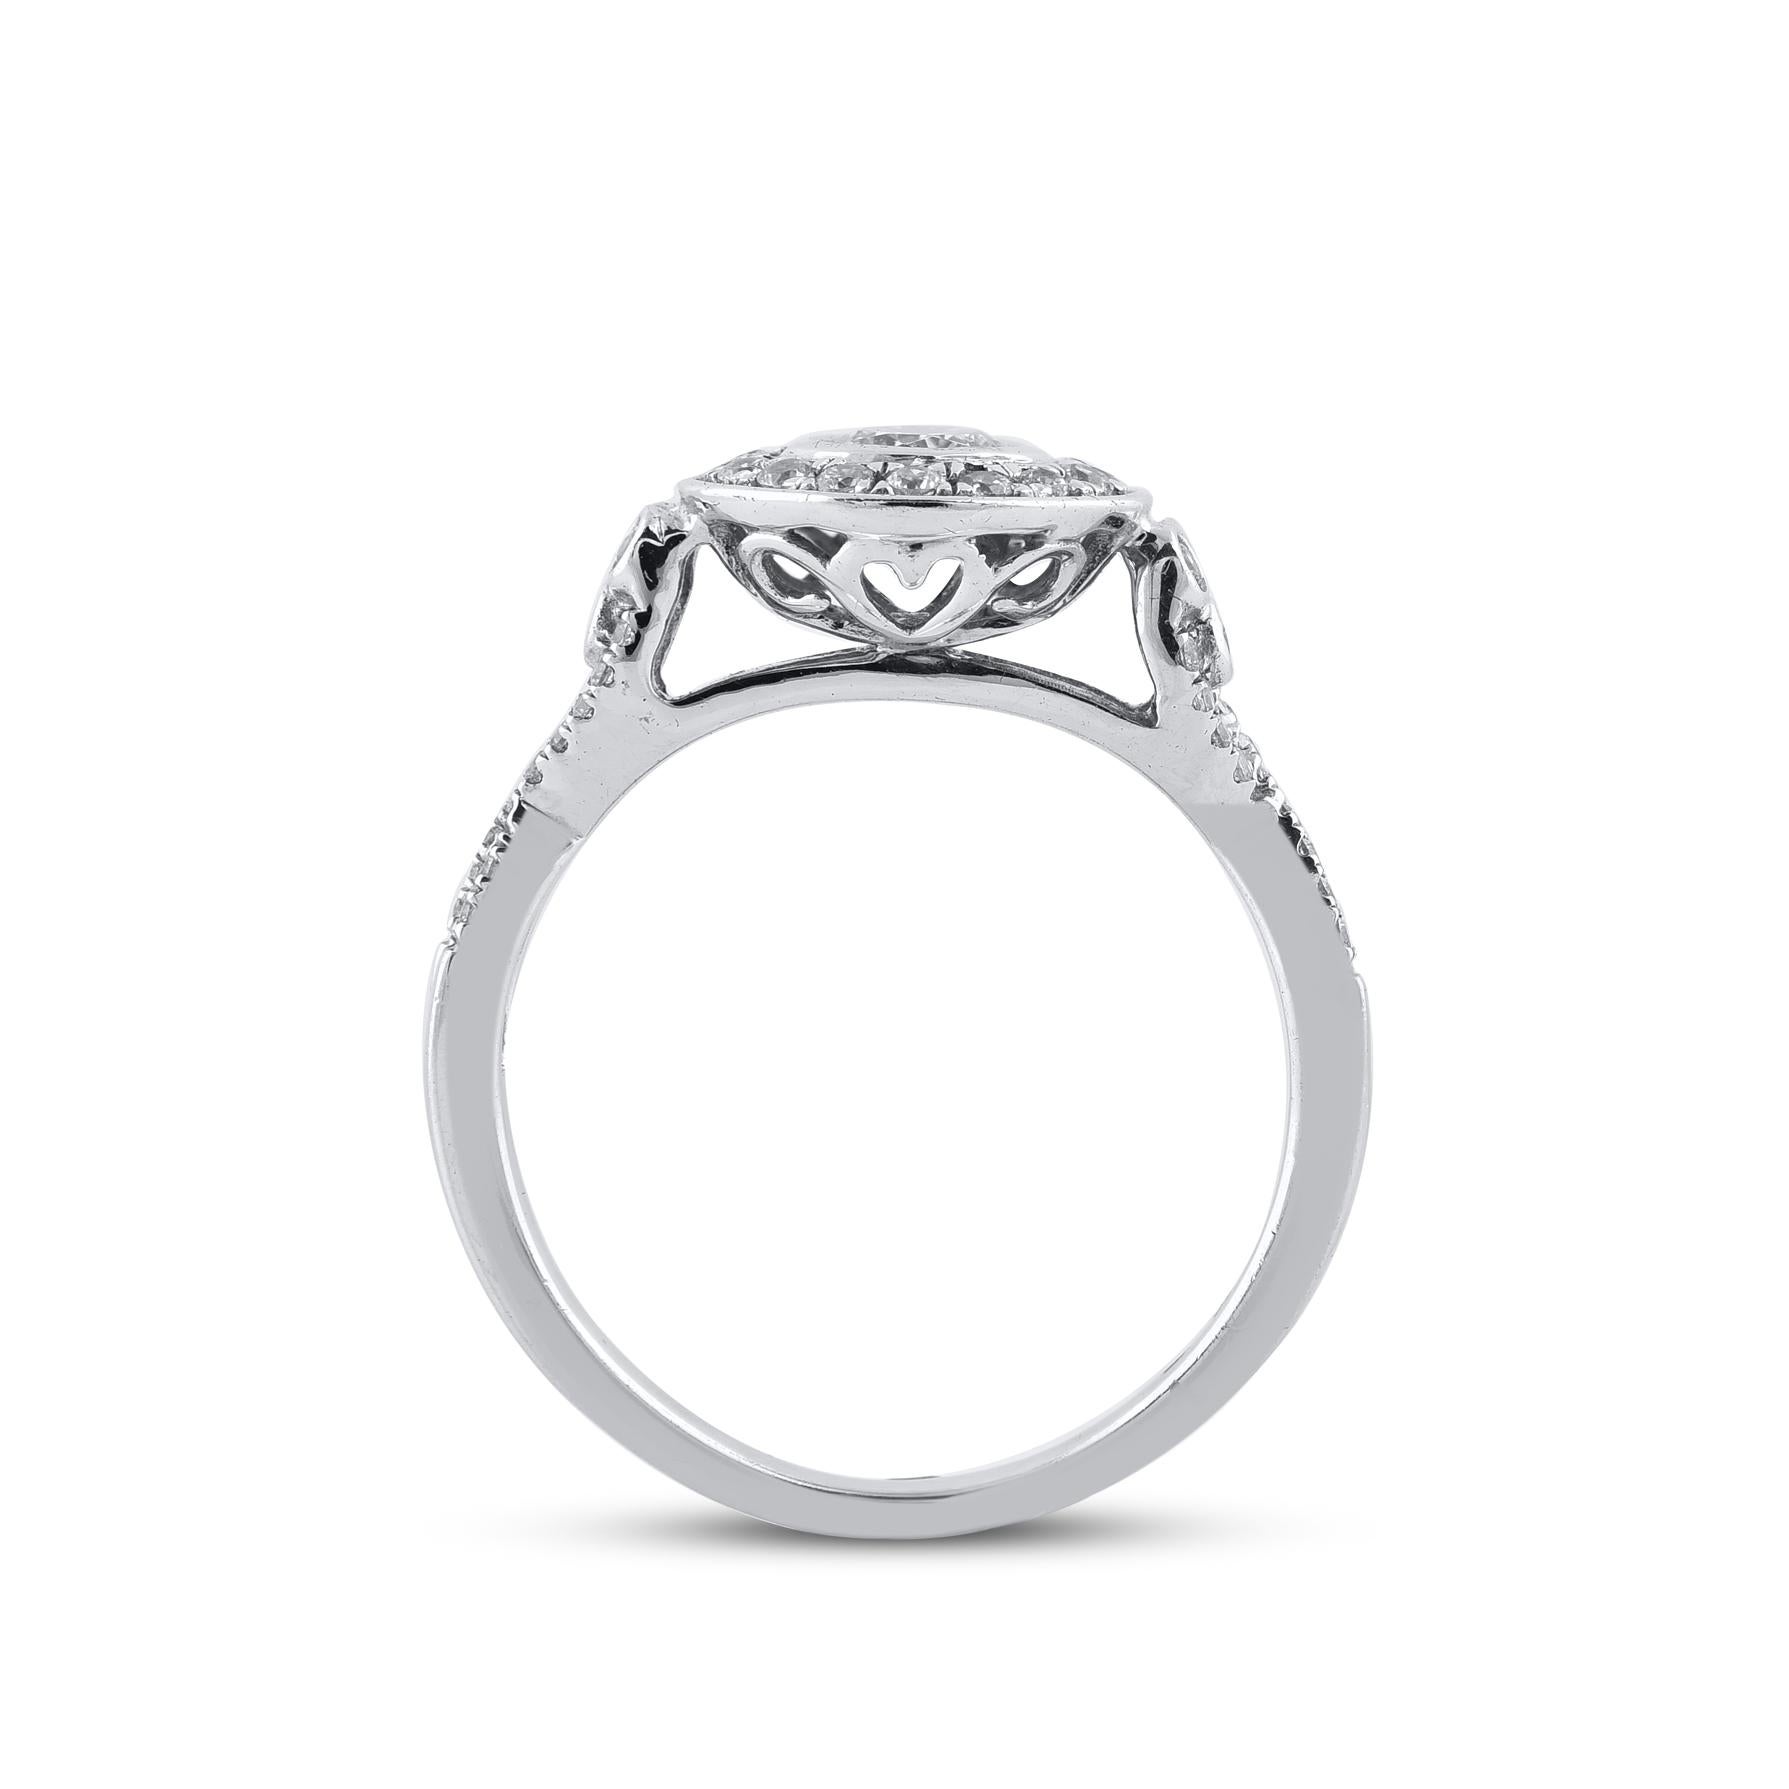 TJD 0.75 Carat Round Diamond 18 Karat White Gold Halo Bridal Engagement Ring In New Condition For Sale In New York, NY